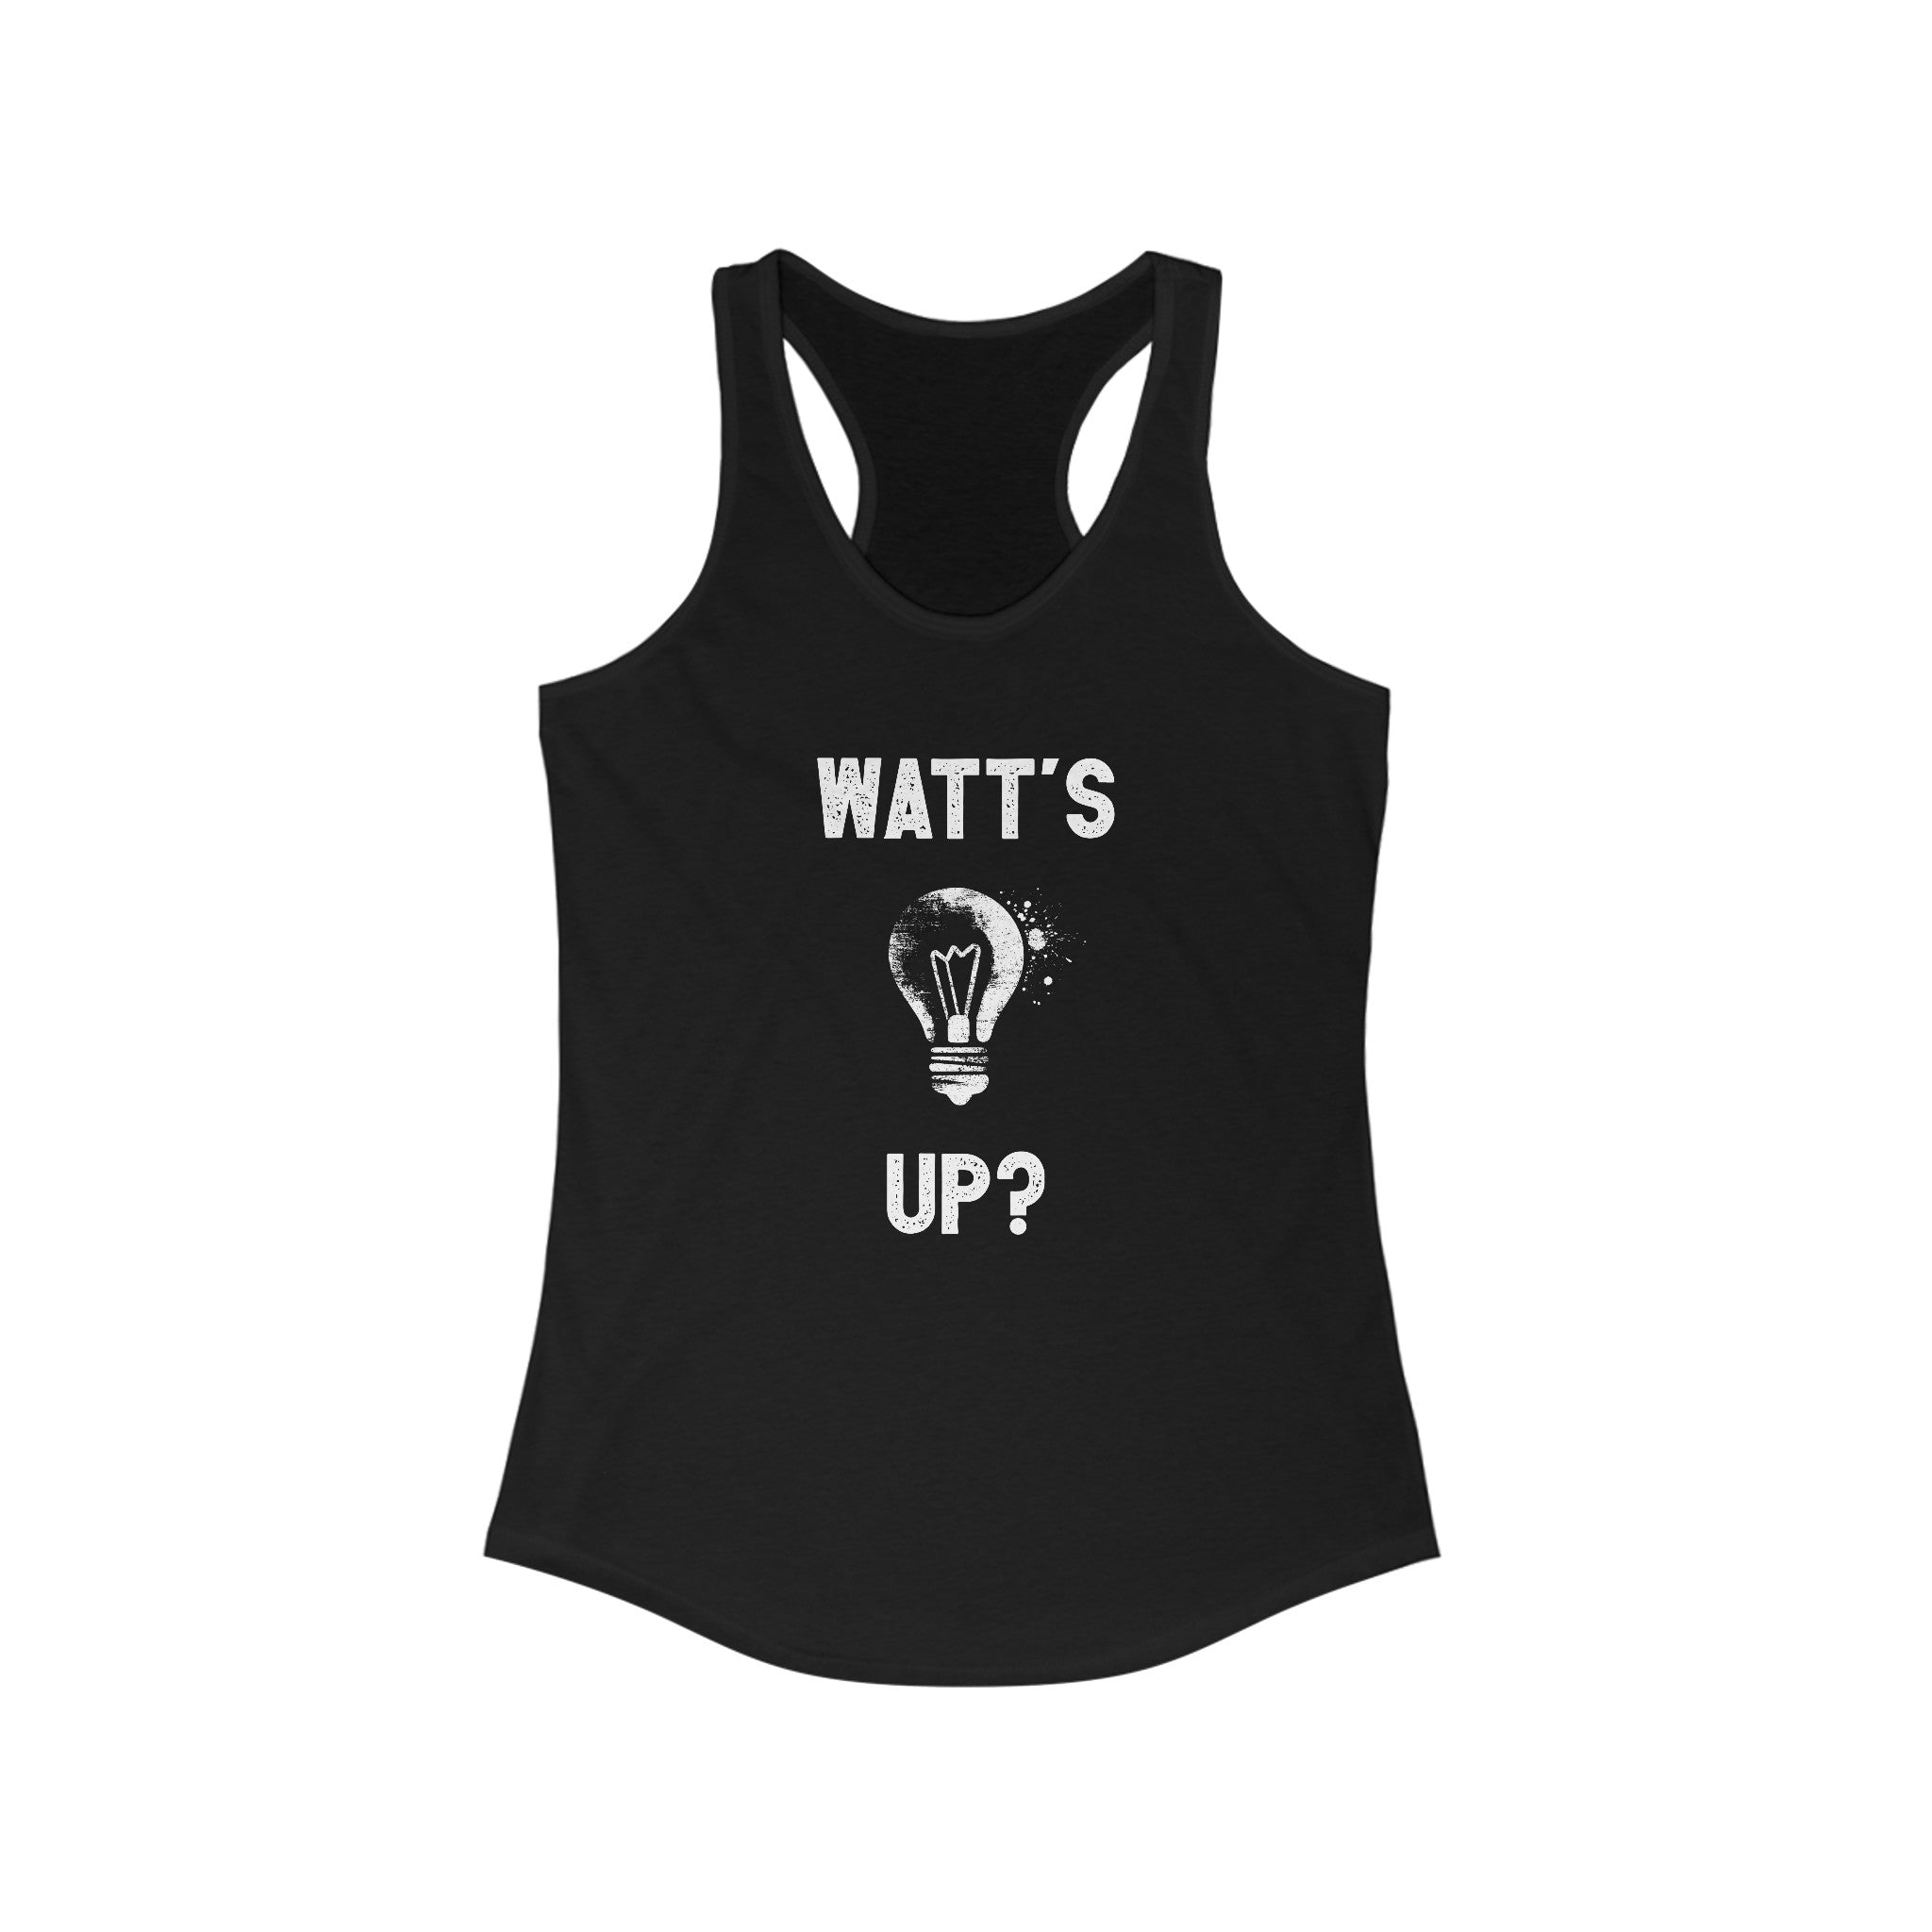 The Watts Up - Women's Racerback Tank is a lightweight black top featuring white text that says "WATT'S UP?" above a graphic of a light bulb, perfect for an active lifestyle.